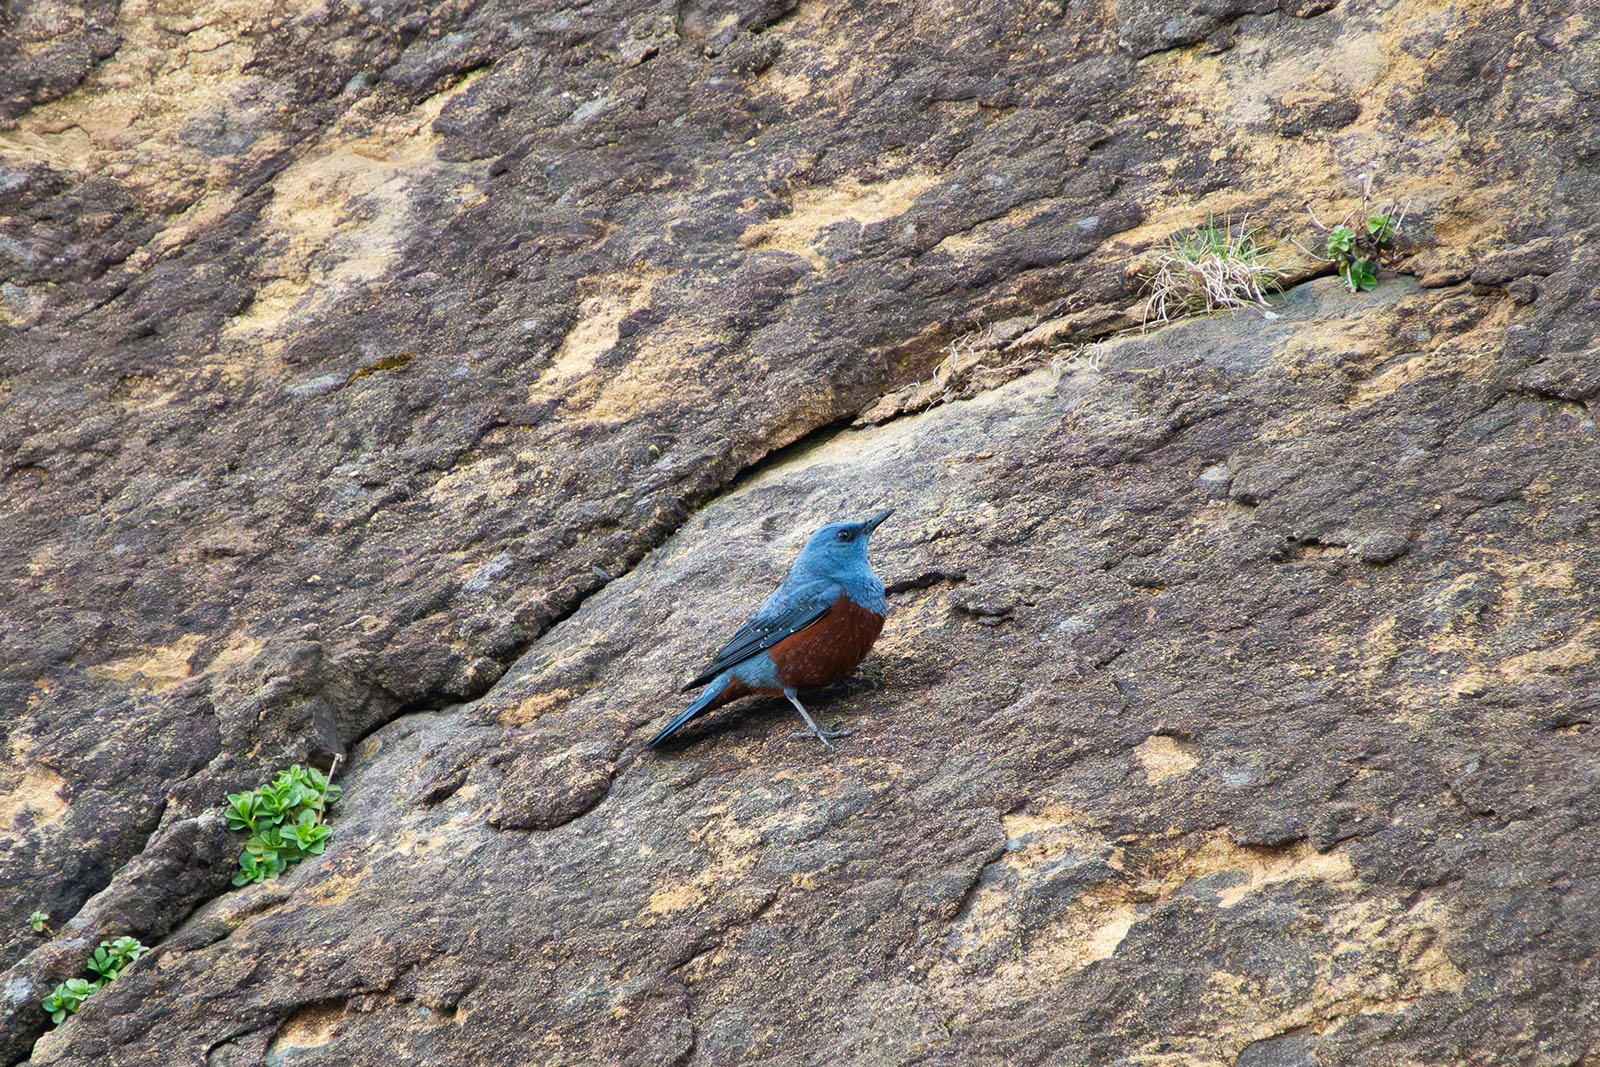 A blue bird with a rust-colored belly perched on a rocky slope with sparse vegetation. the bird is sharply focused against the textured, earth-toned rock background.